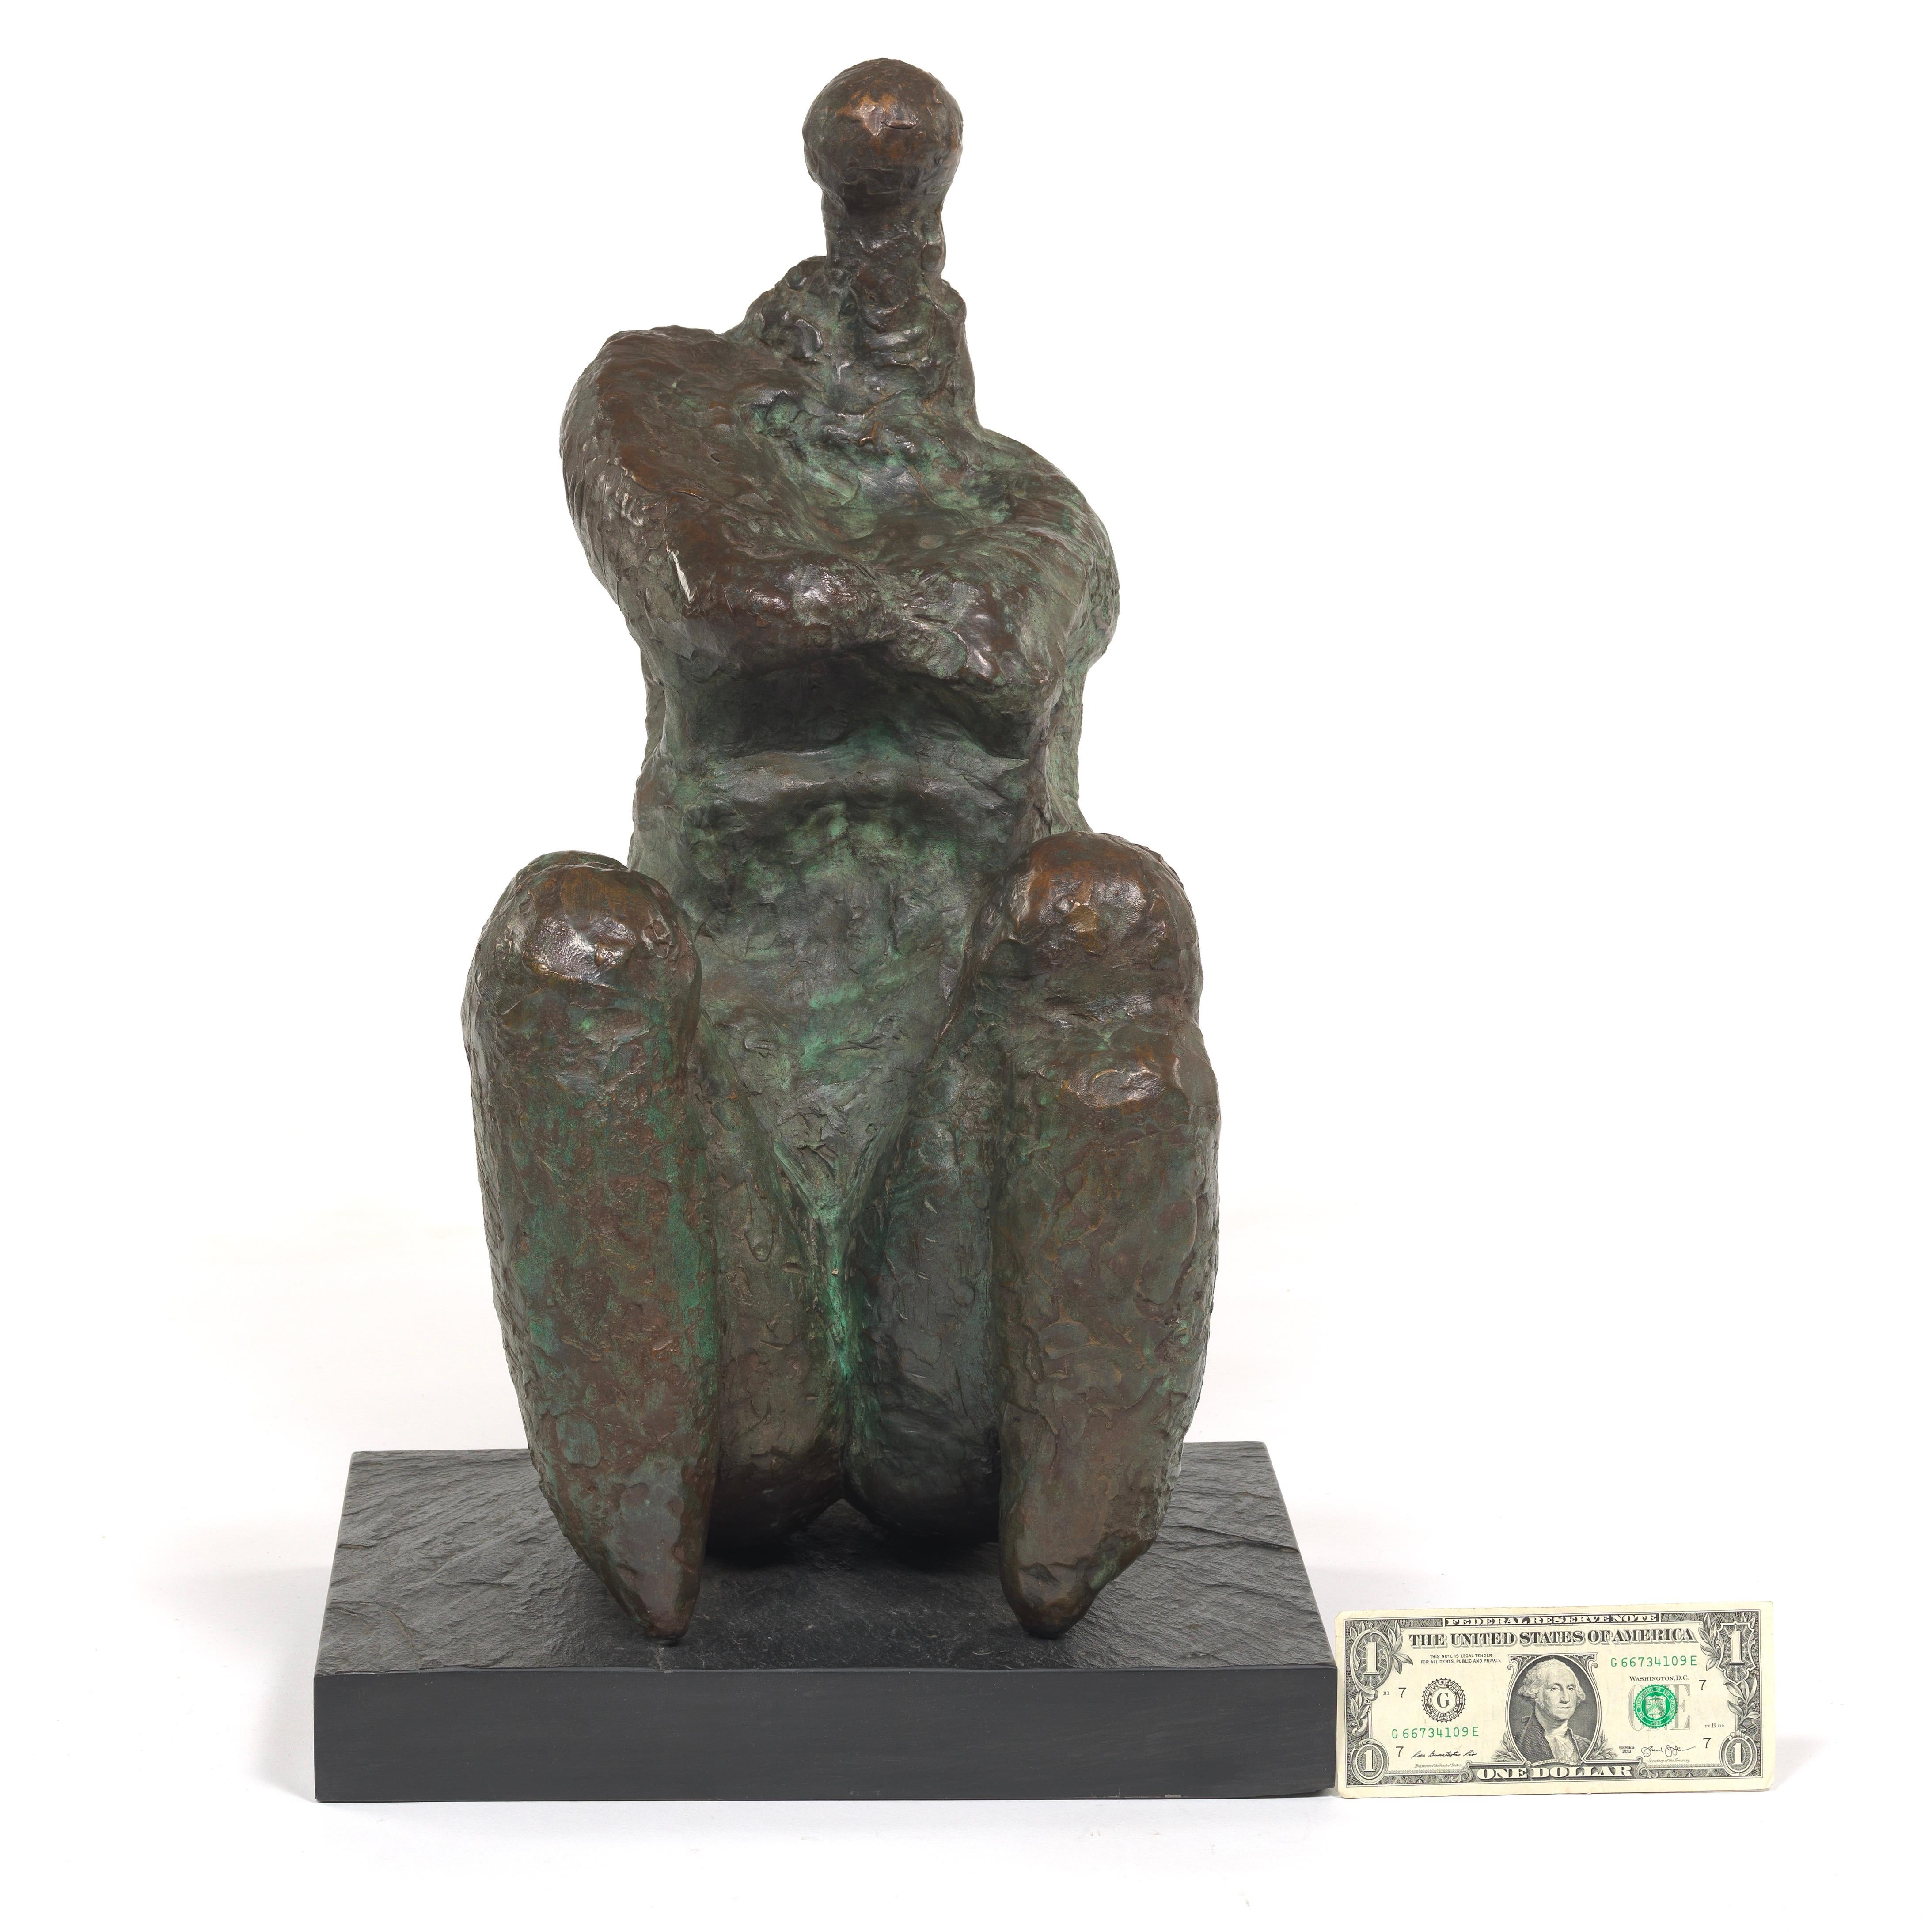 Large and abstract figural bronze sculpture by Robert Winslow. The sculpture is signed.